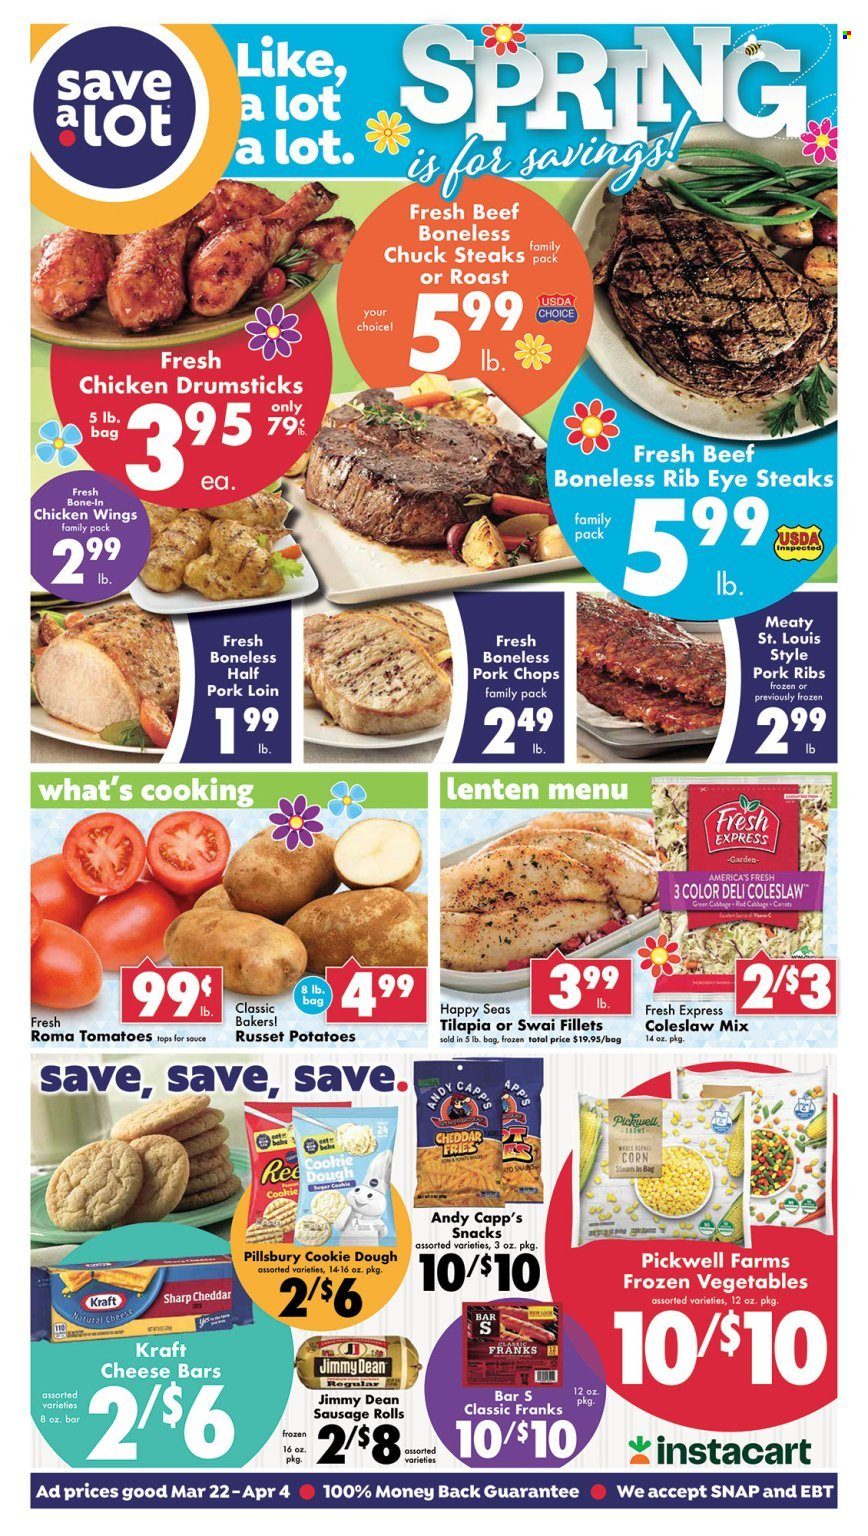 thumbnail - Save a Lot Flyer - 03/22/2023 - 04/04/2023 - Sales products - cabbage, corn, russet potatoes, tomatoes, potatoes, tilapia, swai fillet, coleslaw, Pillsbury, Kraft®, Jimmy Dean, roast, cheddar, cheese, frozen vegetables, chicken wings, potato fries, cookie dough, snack, chicken drumsticks, chicken, beef meat, steak, ribs, pork chops, pork loin, pork meat, pork ribs. Page 1.